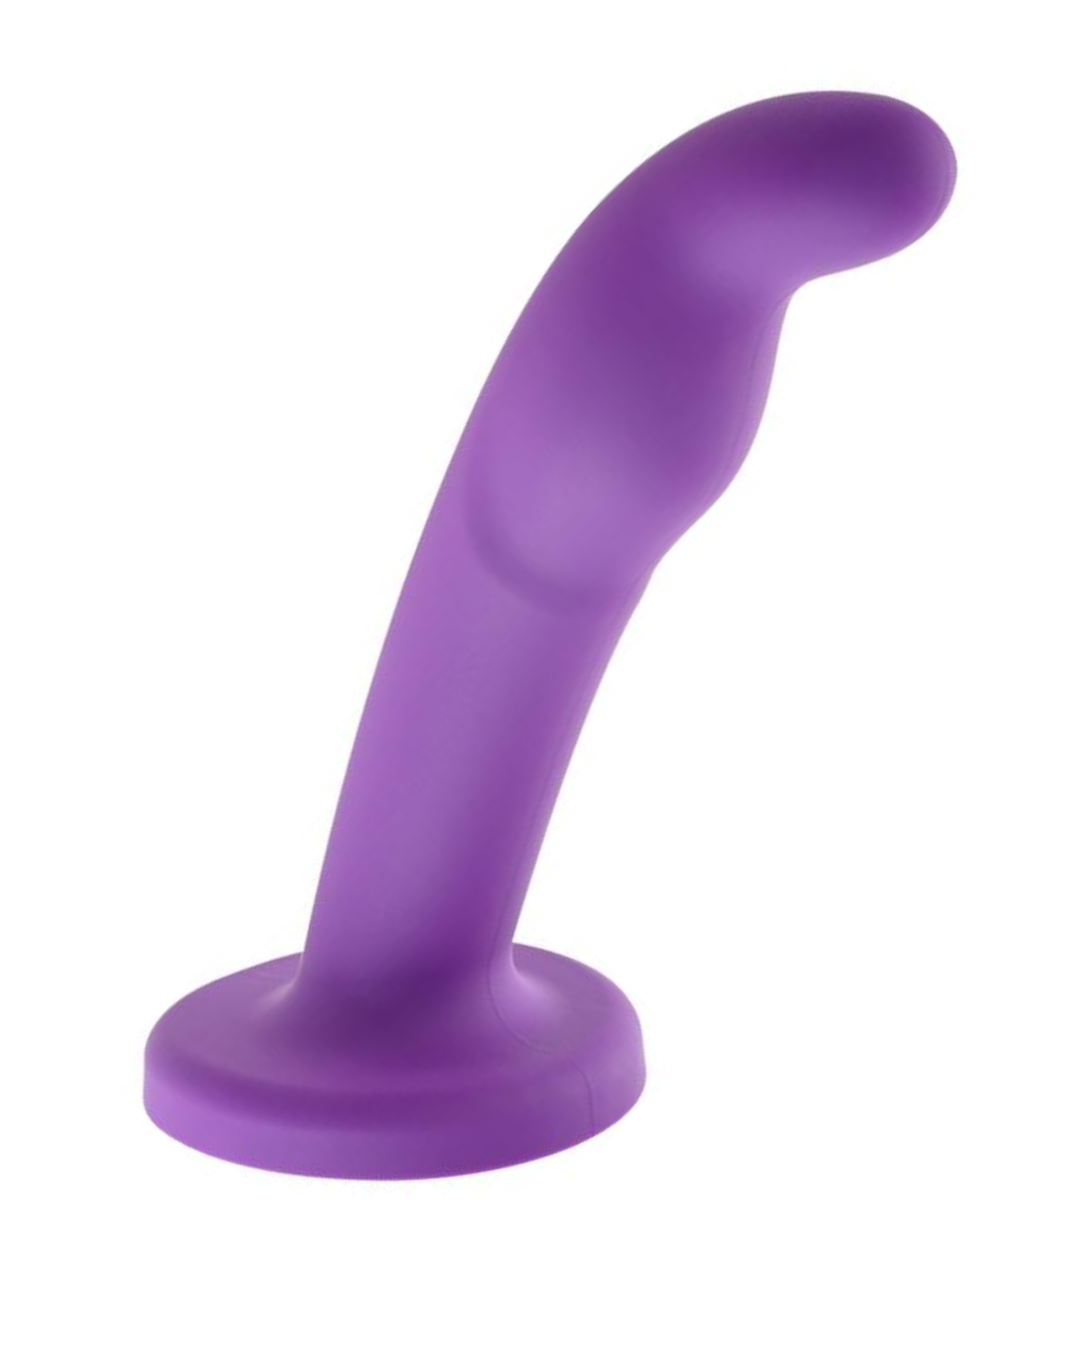 Sportsheets Astil 8" Silicone G-Spot & Prostate Dildo - Purple on a white background side view of curvature